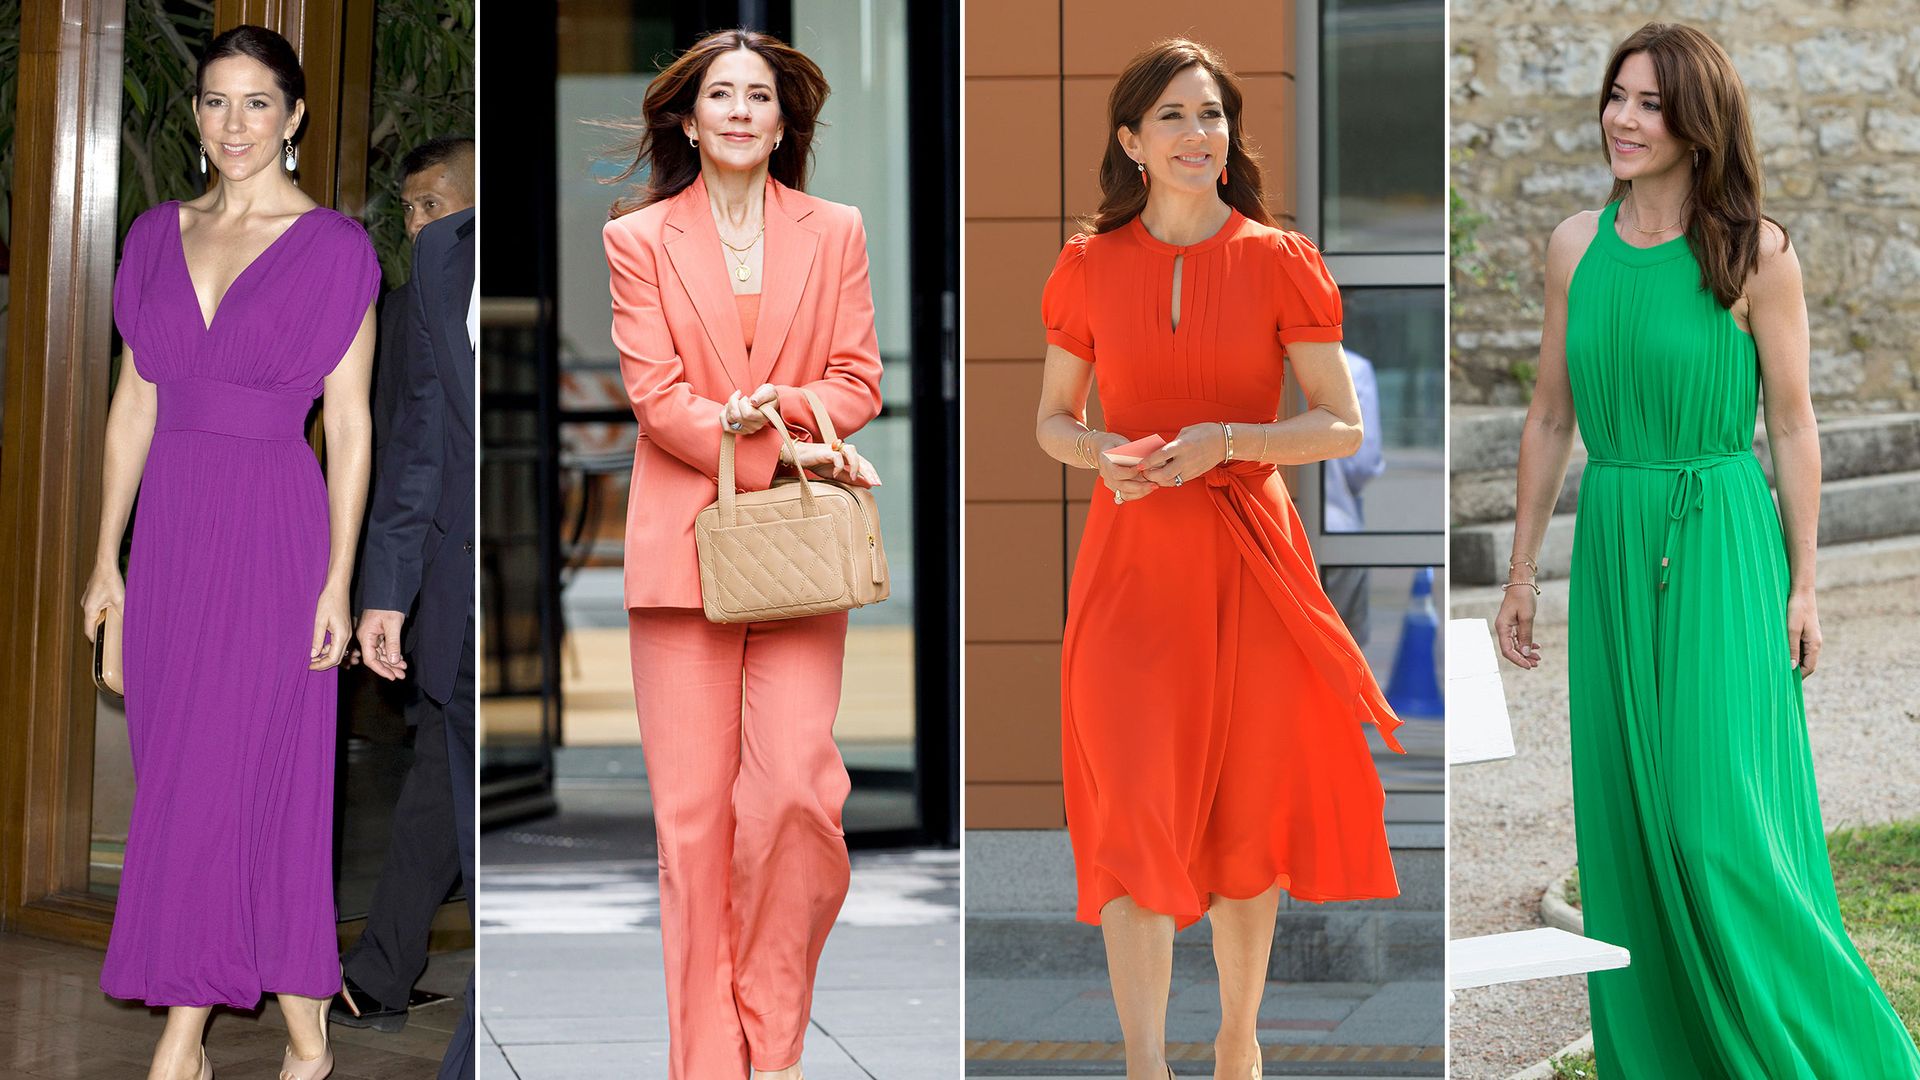 Queen Mary's brightest outfits